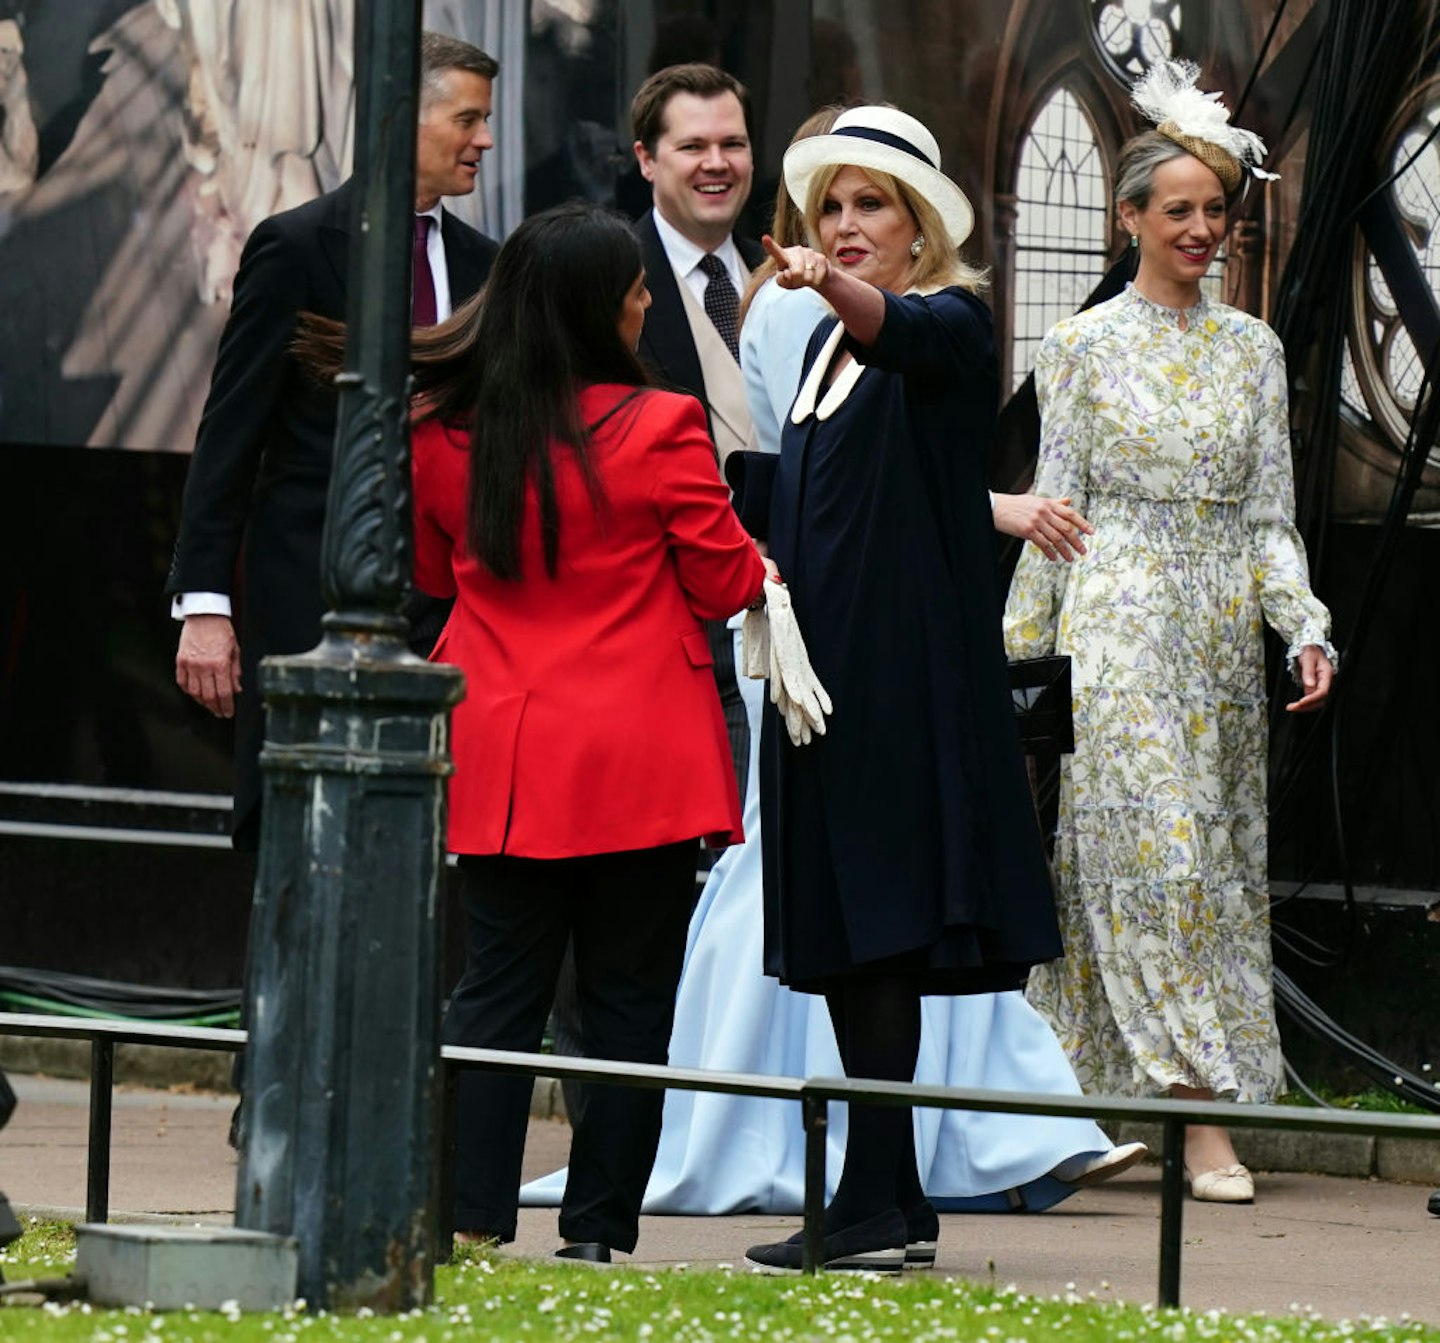 Joanna Lumley arrives at Westminster Abbey for the coronation